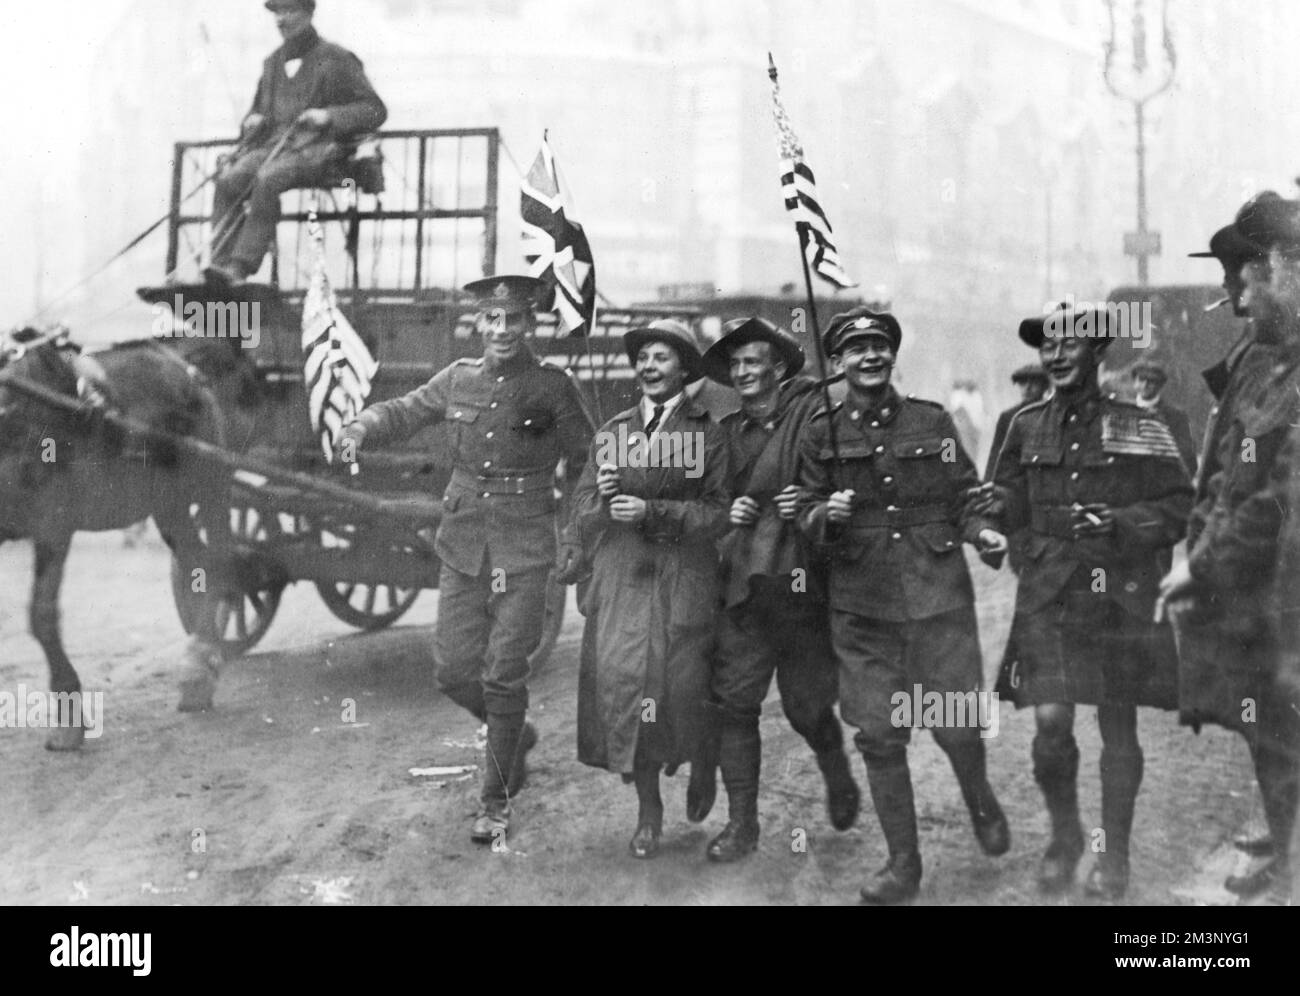 Armistice Day scene in London at the end of World War One: soldiers with British Union Jack and American Stars and Stripes flags.  11th November 1918 Stock Photo